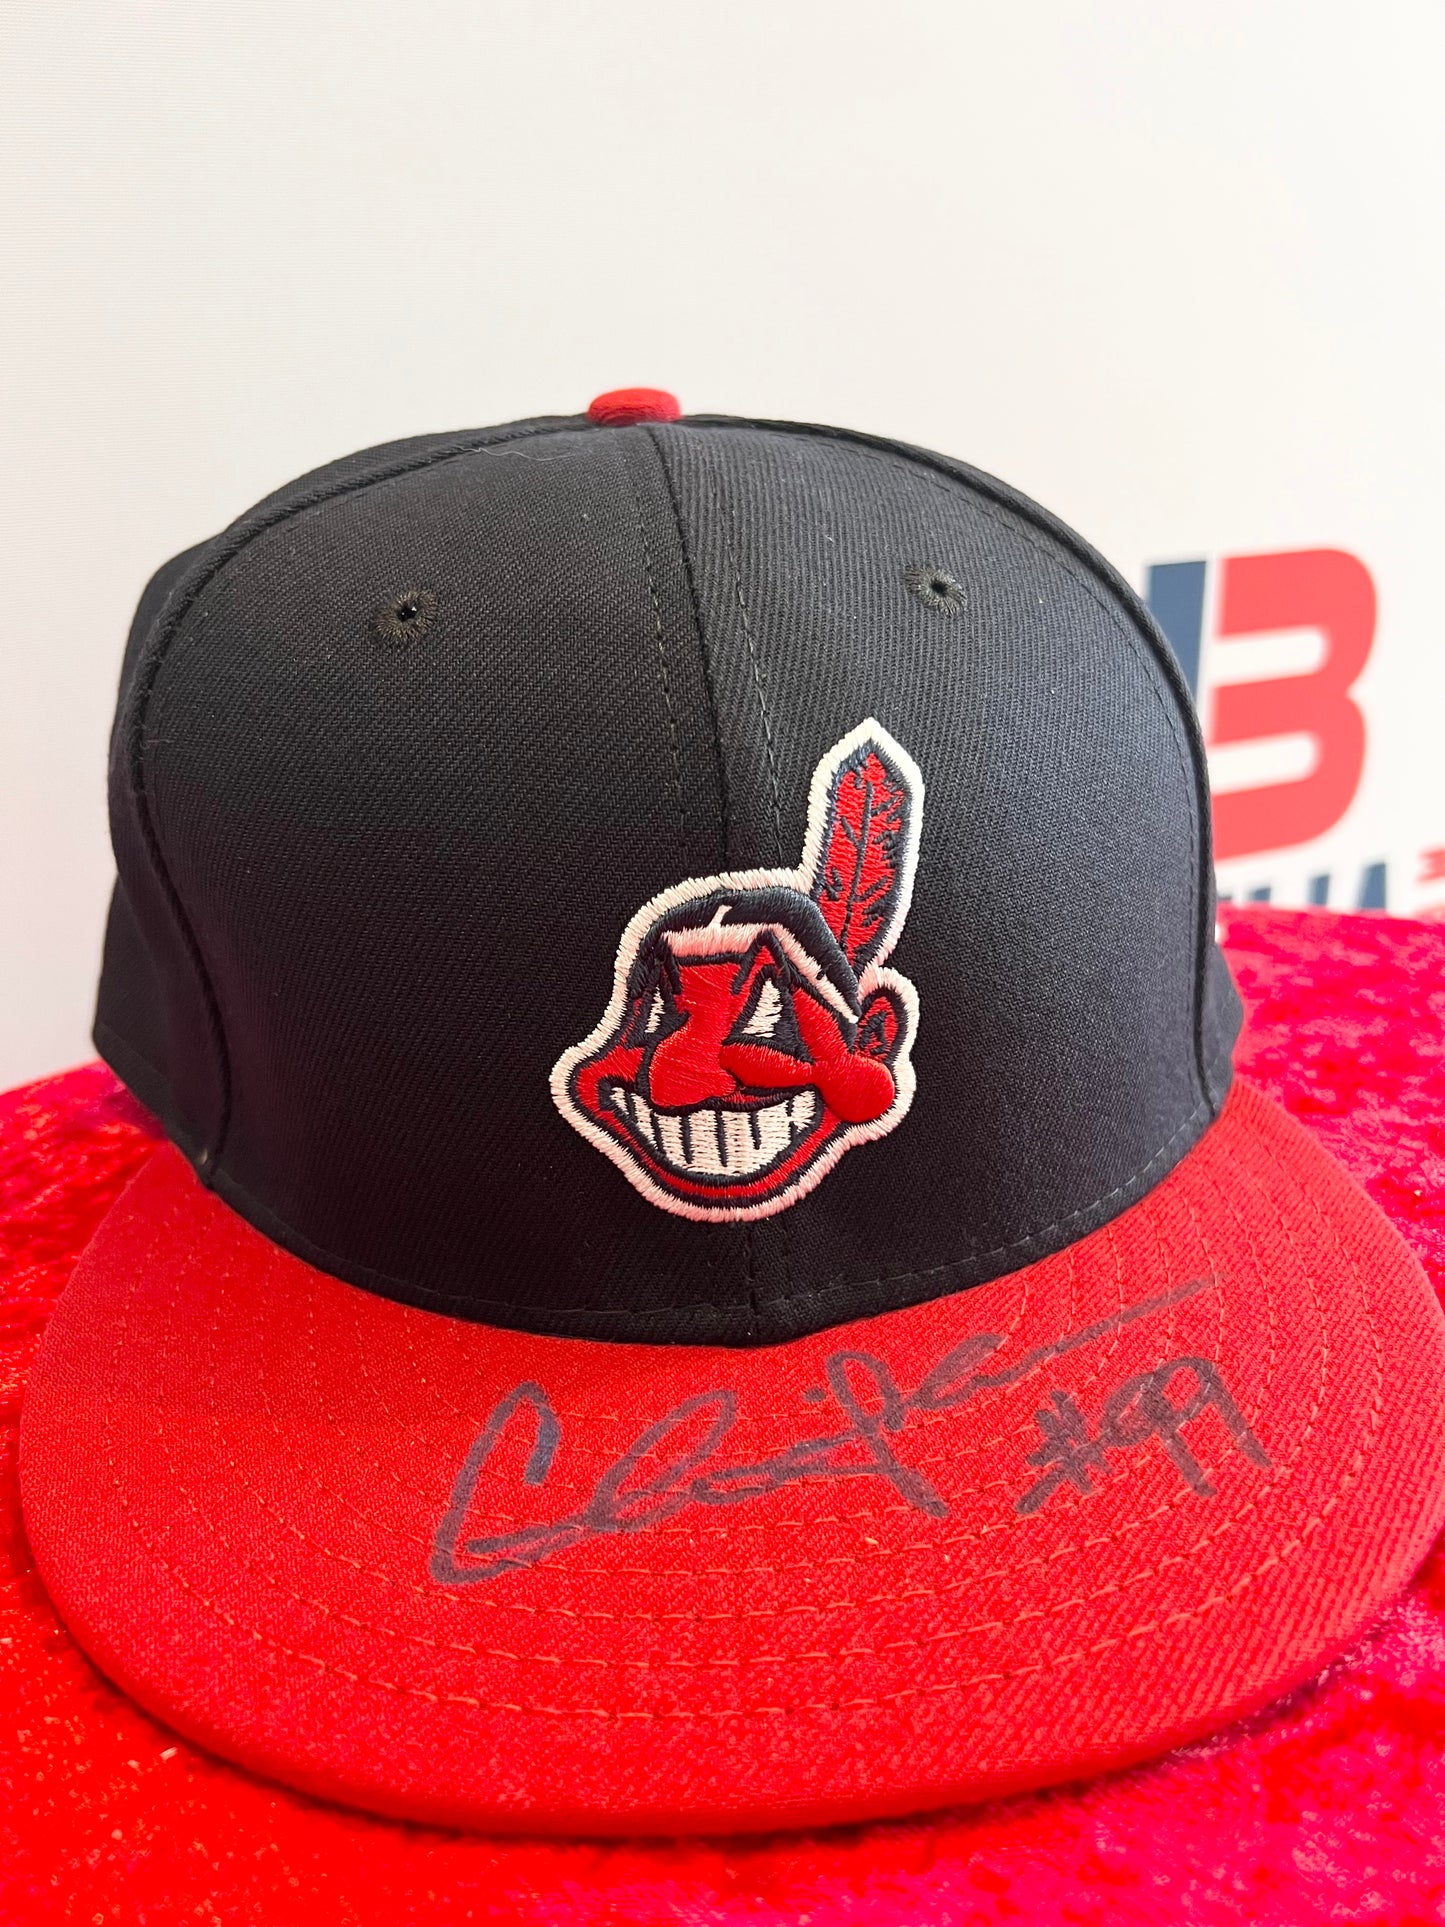 Charlie Sheen Signed Clevland Indians Baseball Hat PSA Authentication RARE